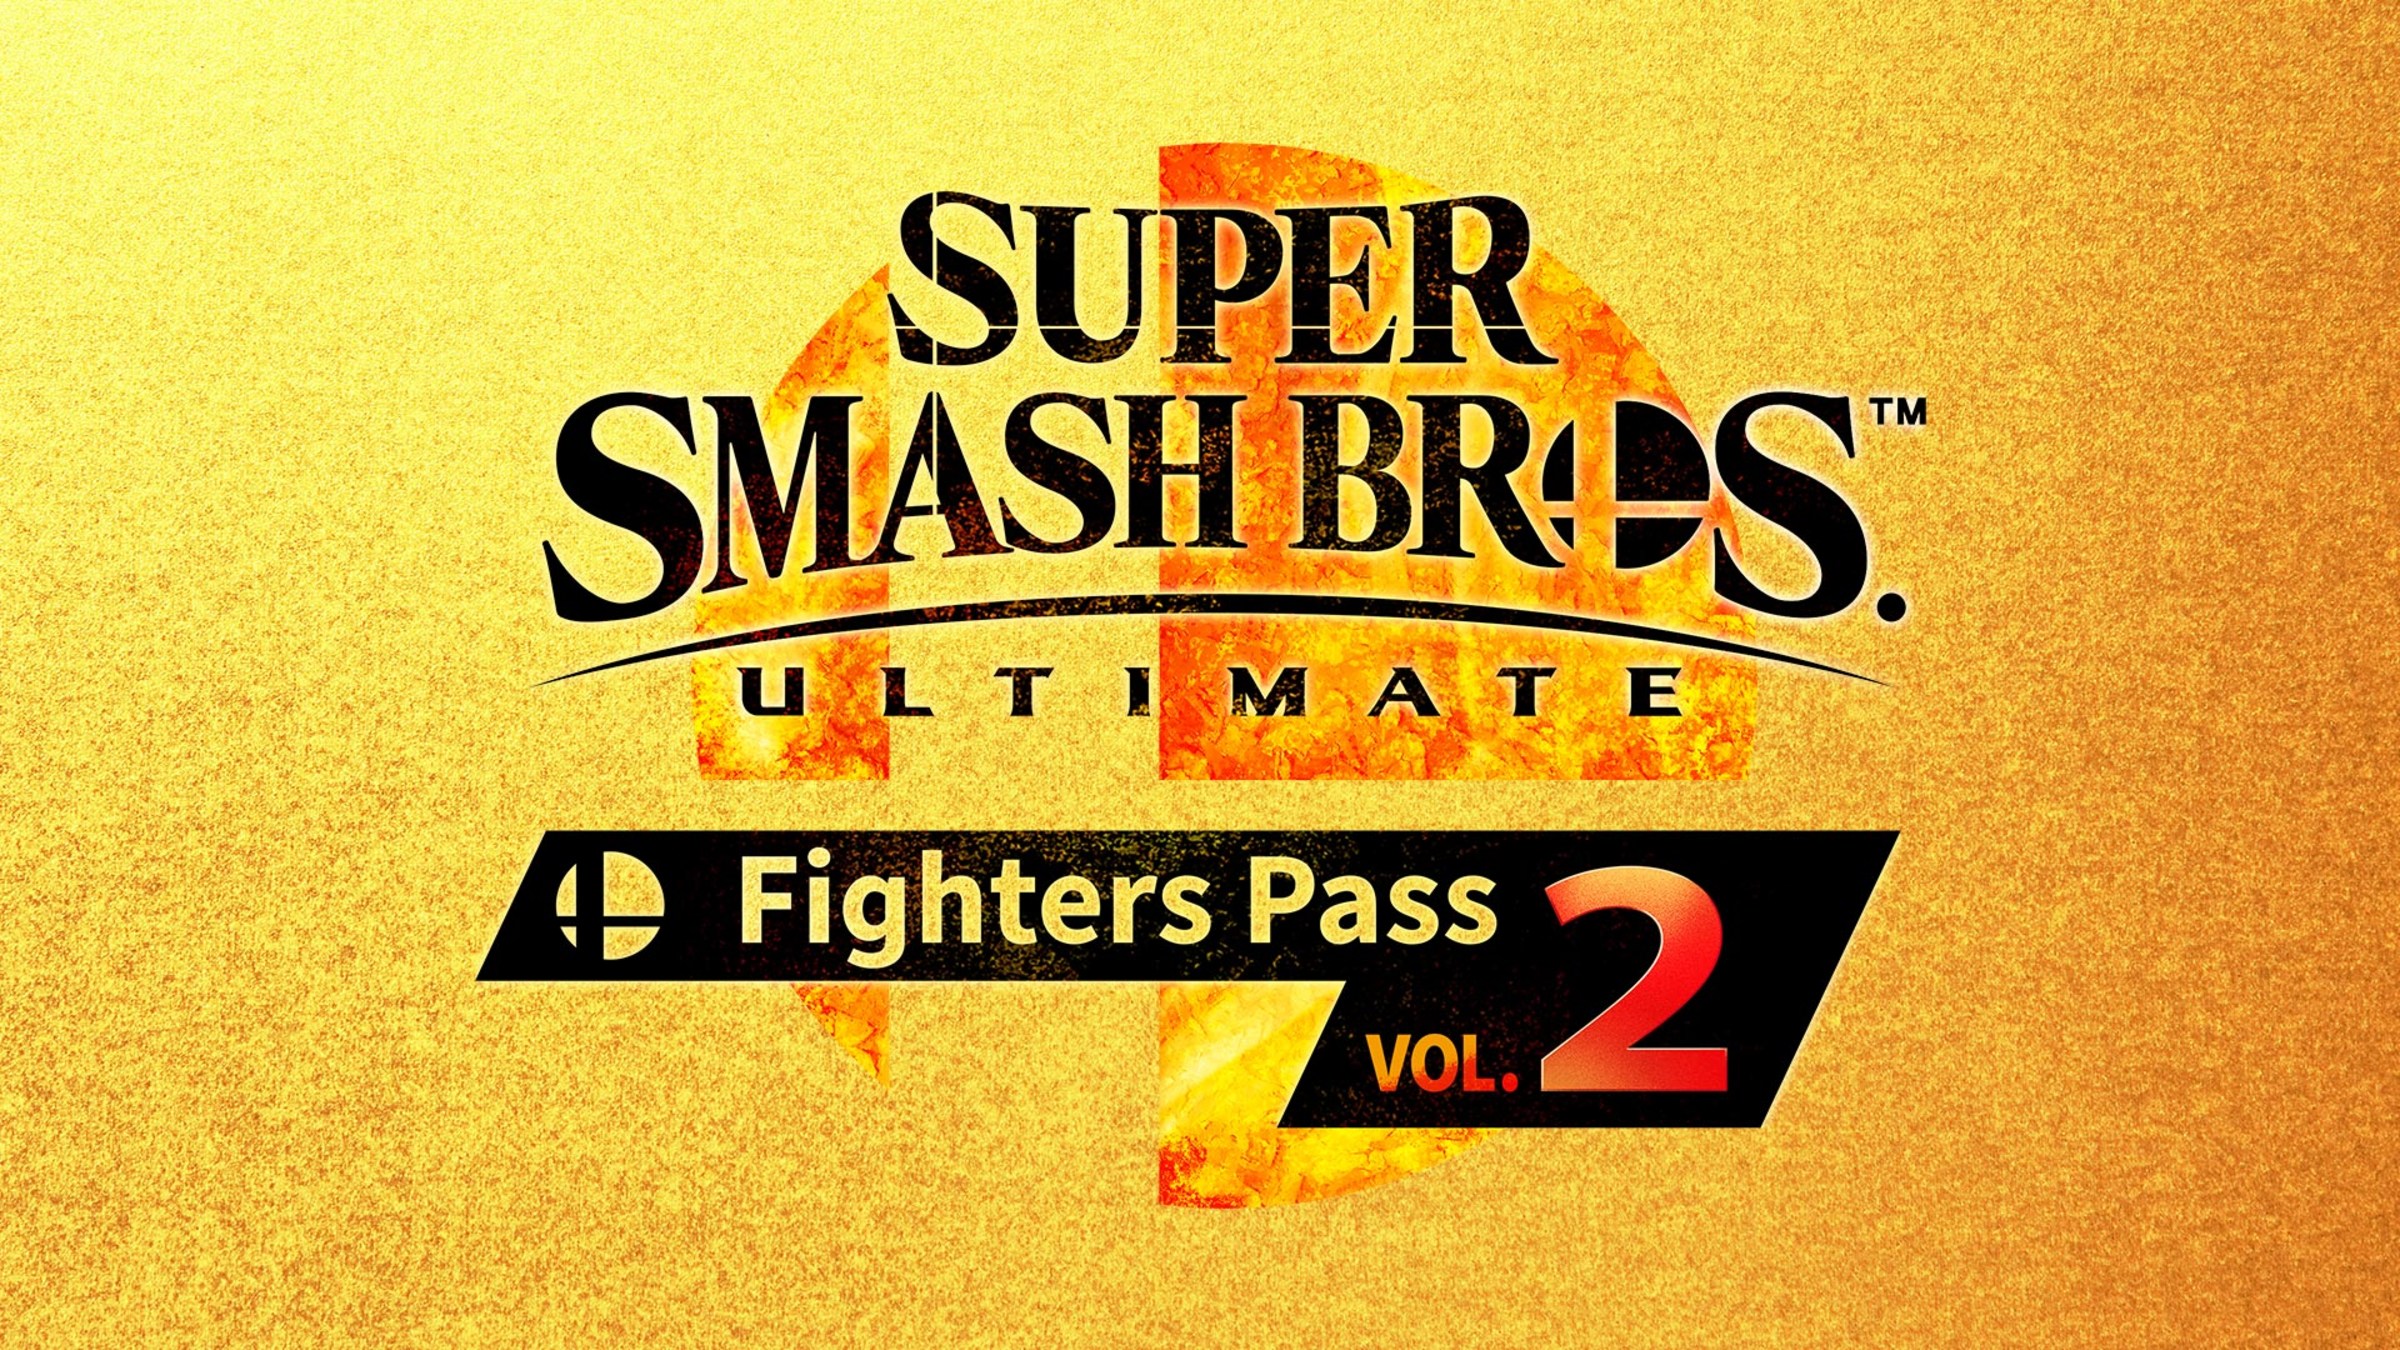 Pass Vol. 2 Bros.™ Official - Fighters Nintendo Ultimate: Site Super for Nintendo Switch Smash